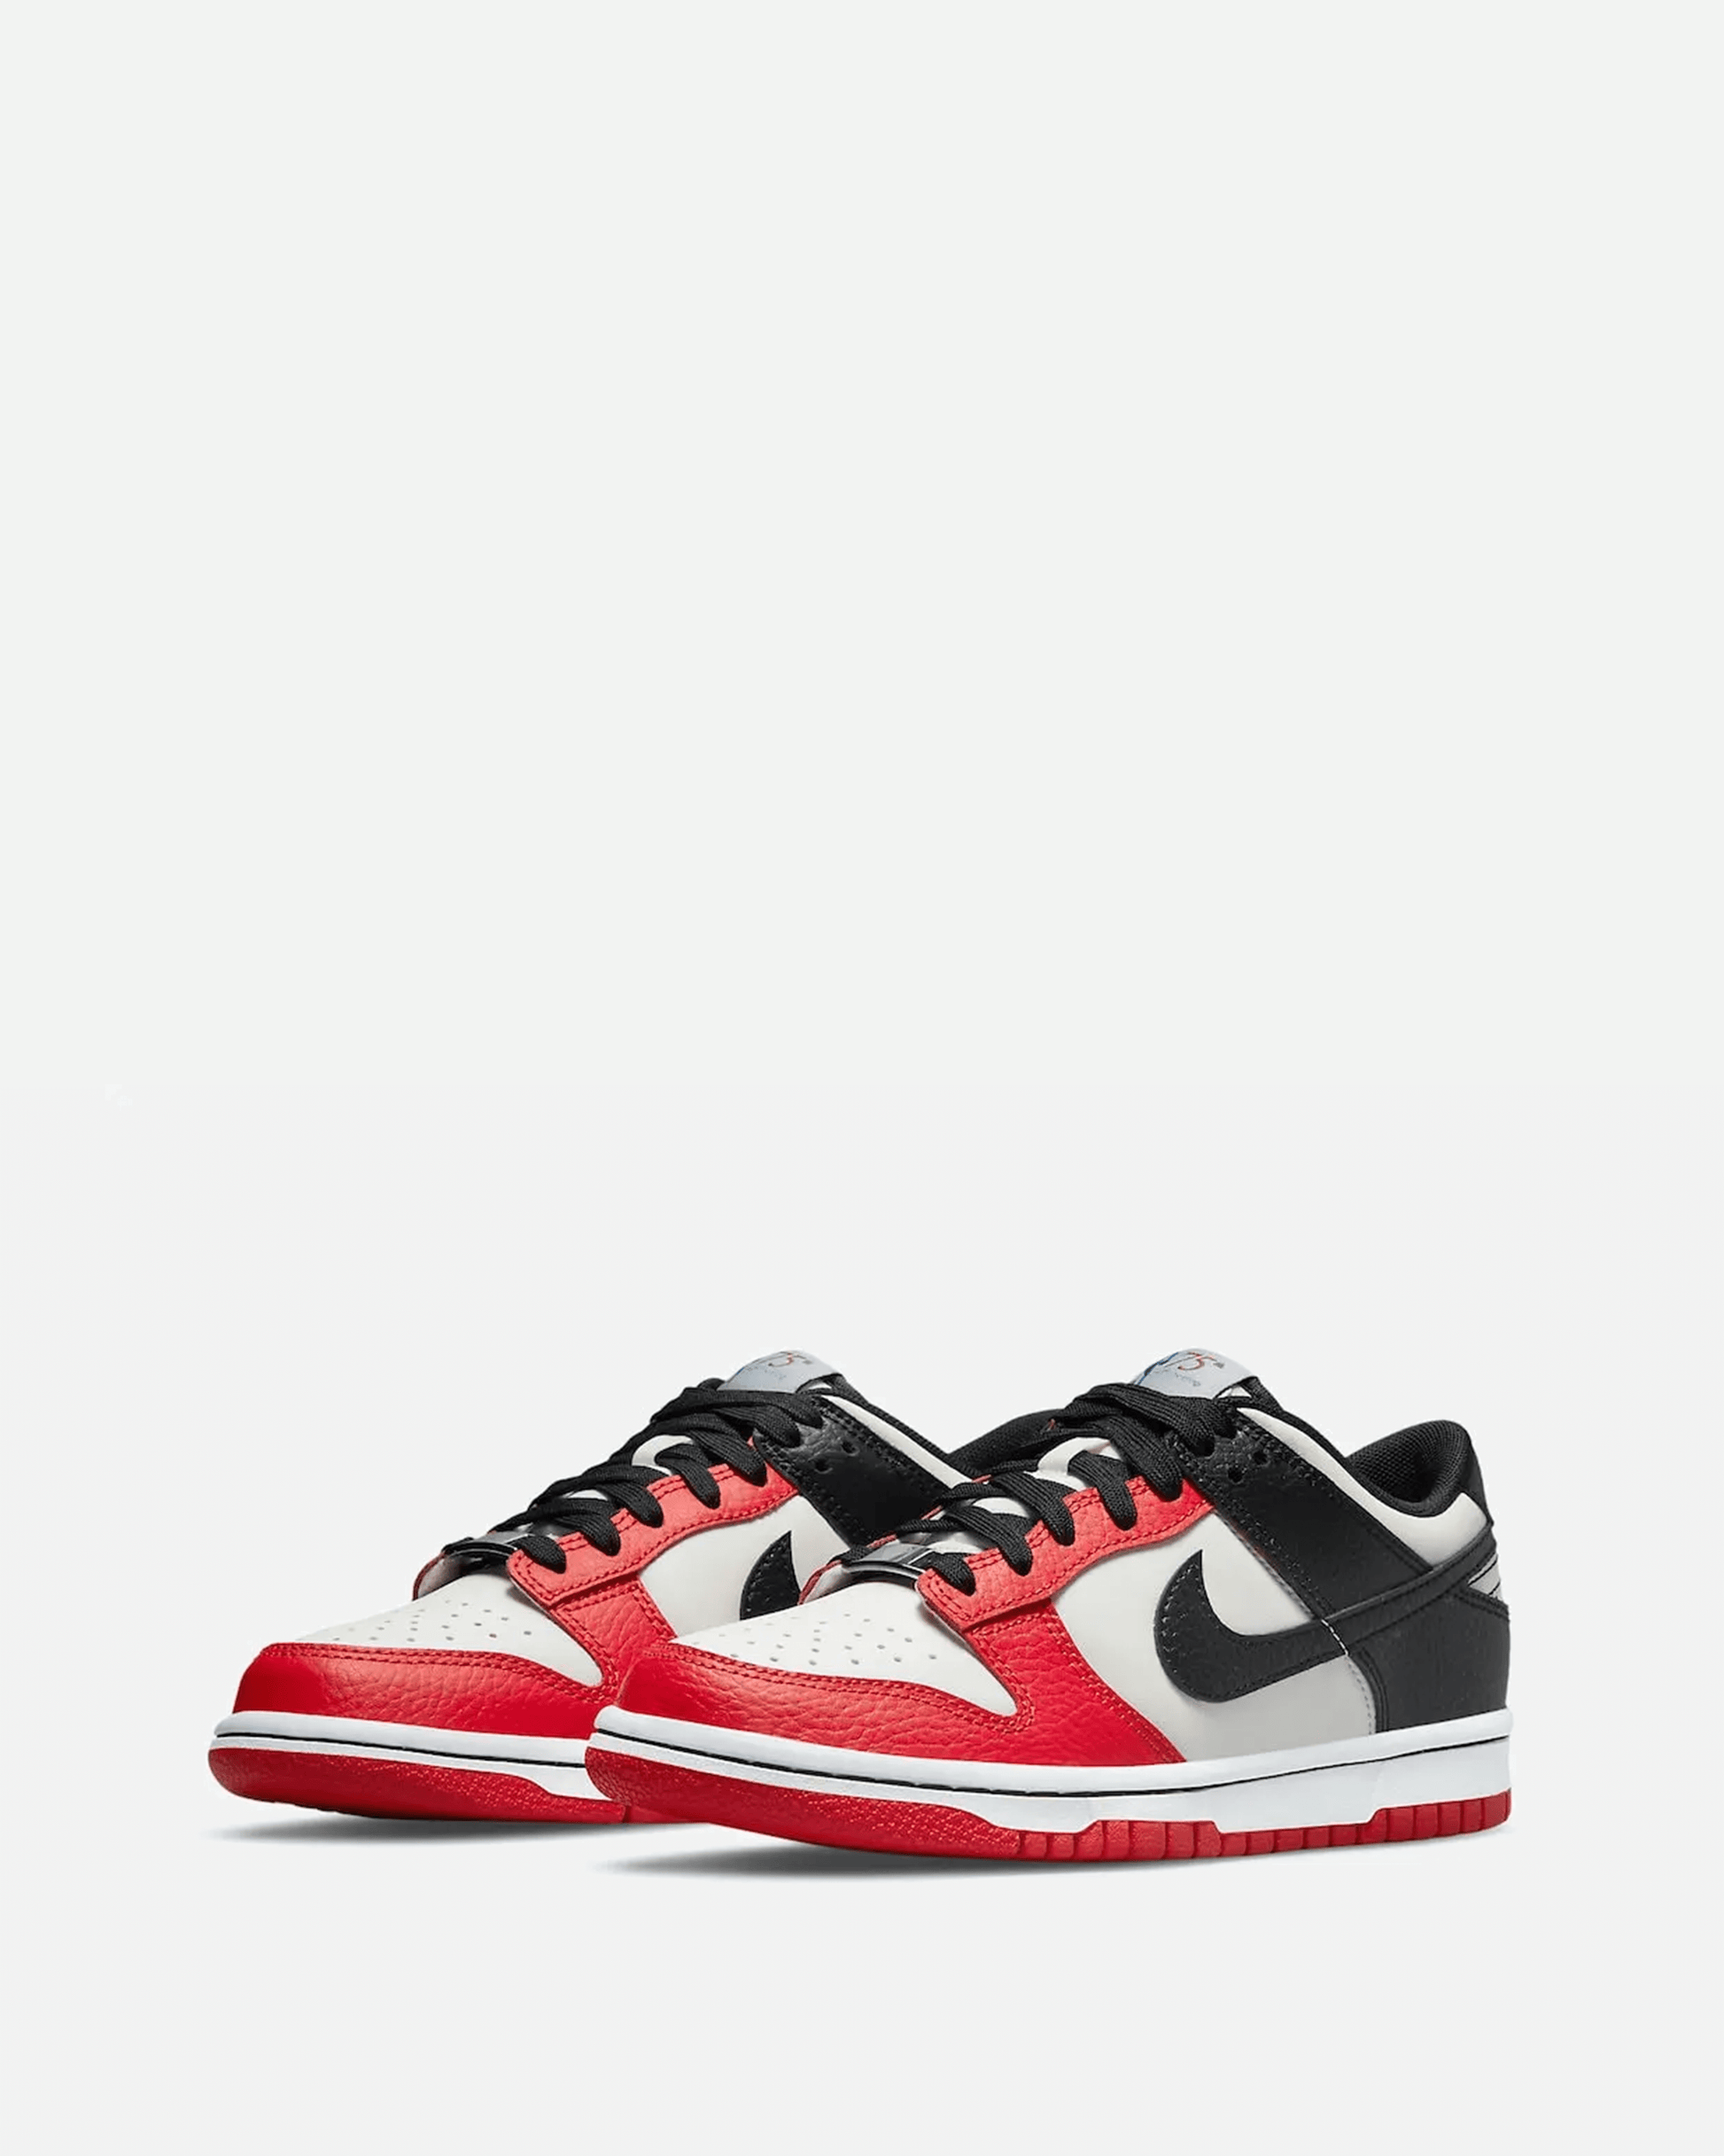 dunk low emb chicago on feet